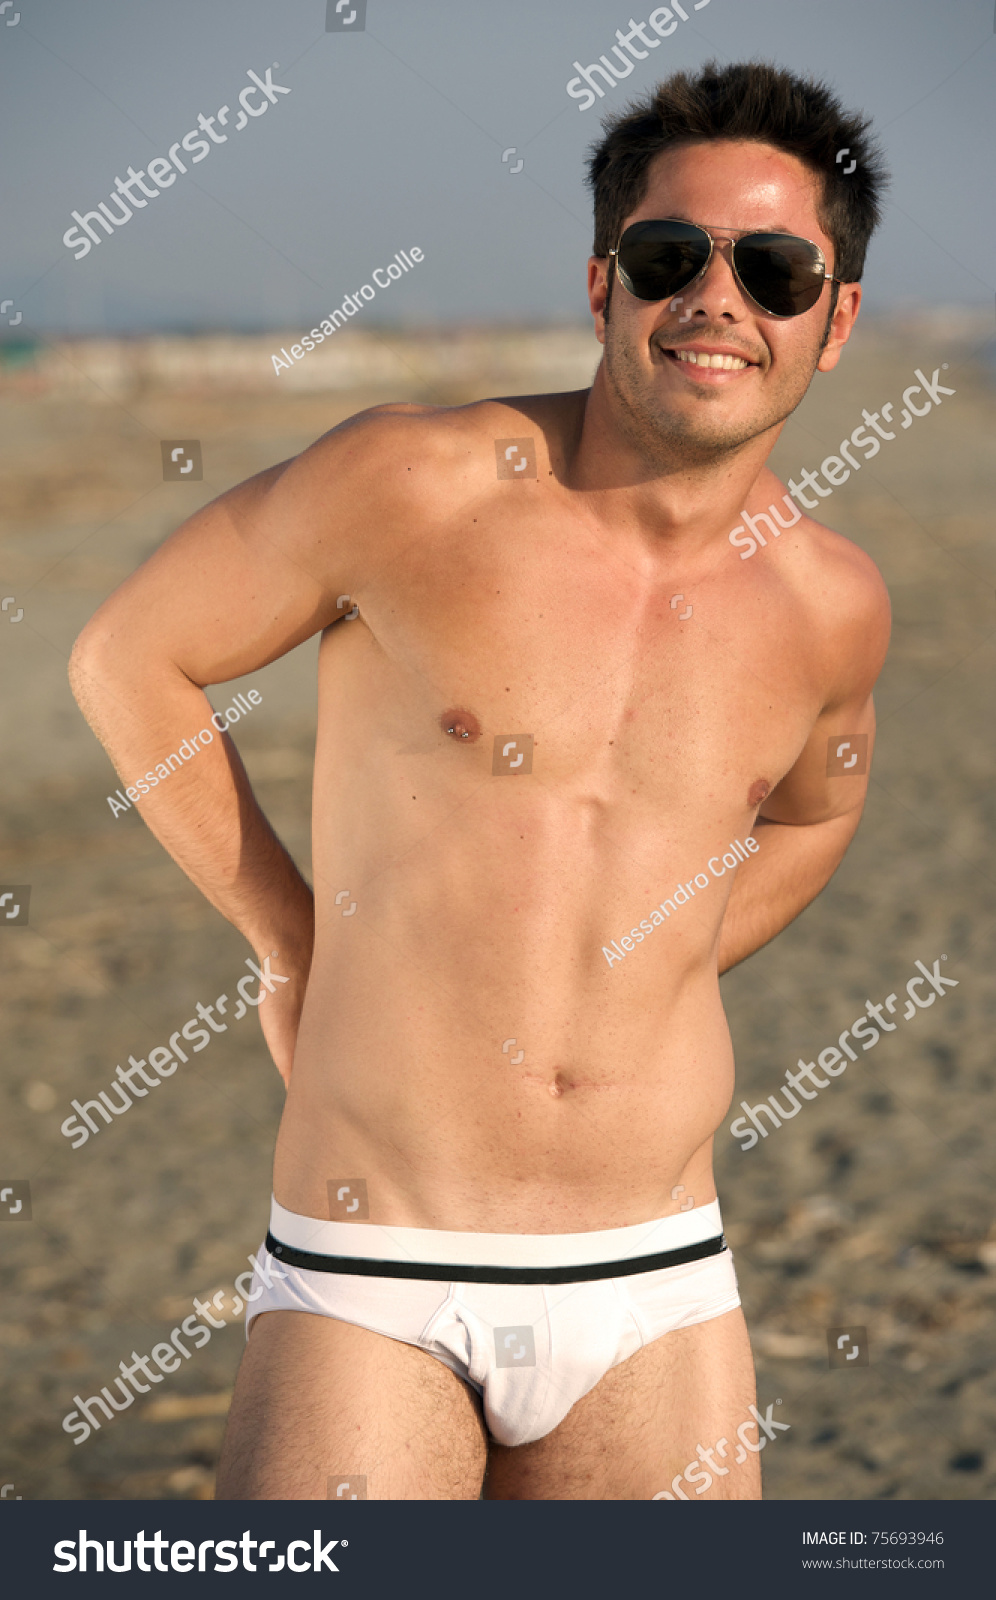 Topless Swimmer Man At The Beach Shirtless